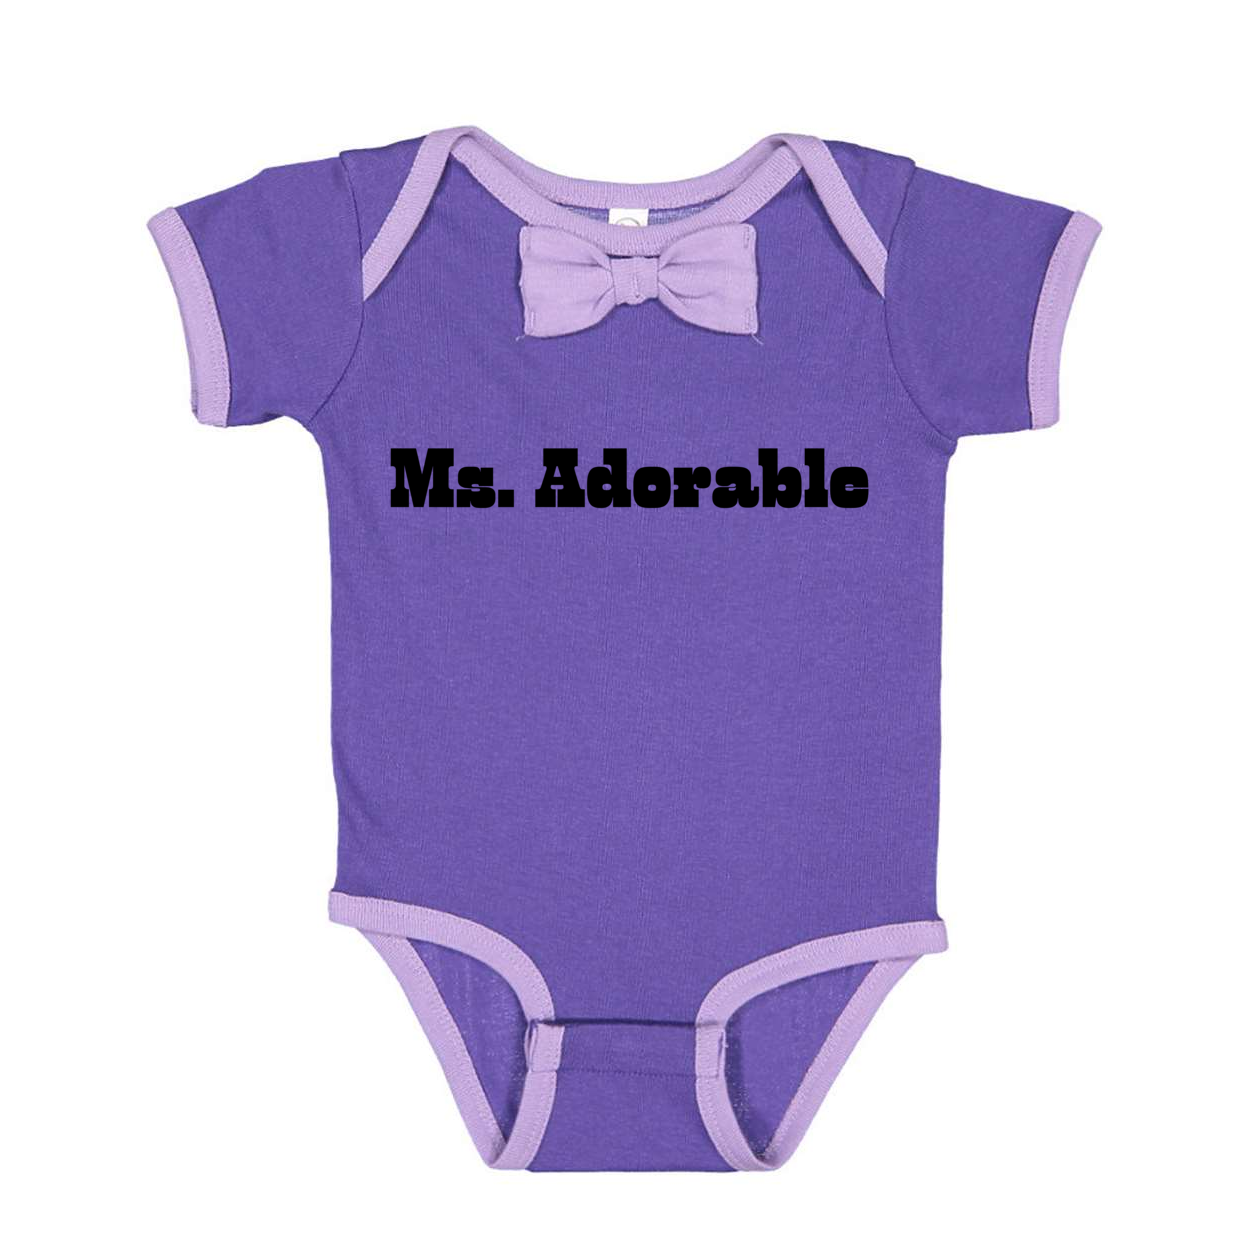 PURPLE LAVENDER - Ms. Adorable Baby Rib Bow Tie Bodysuit - Ships from The US - infant onesie at TFC&H Co.